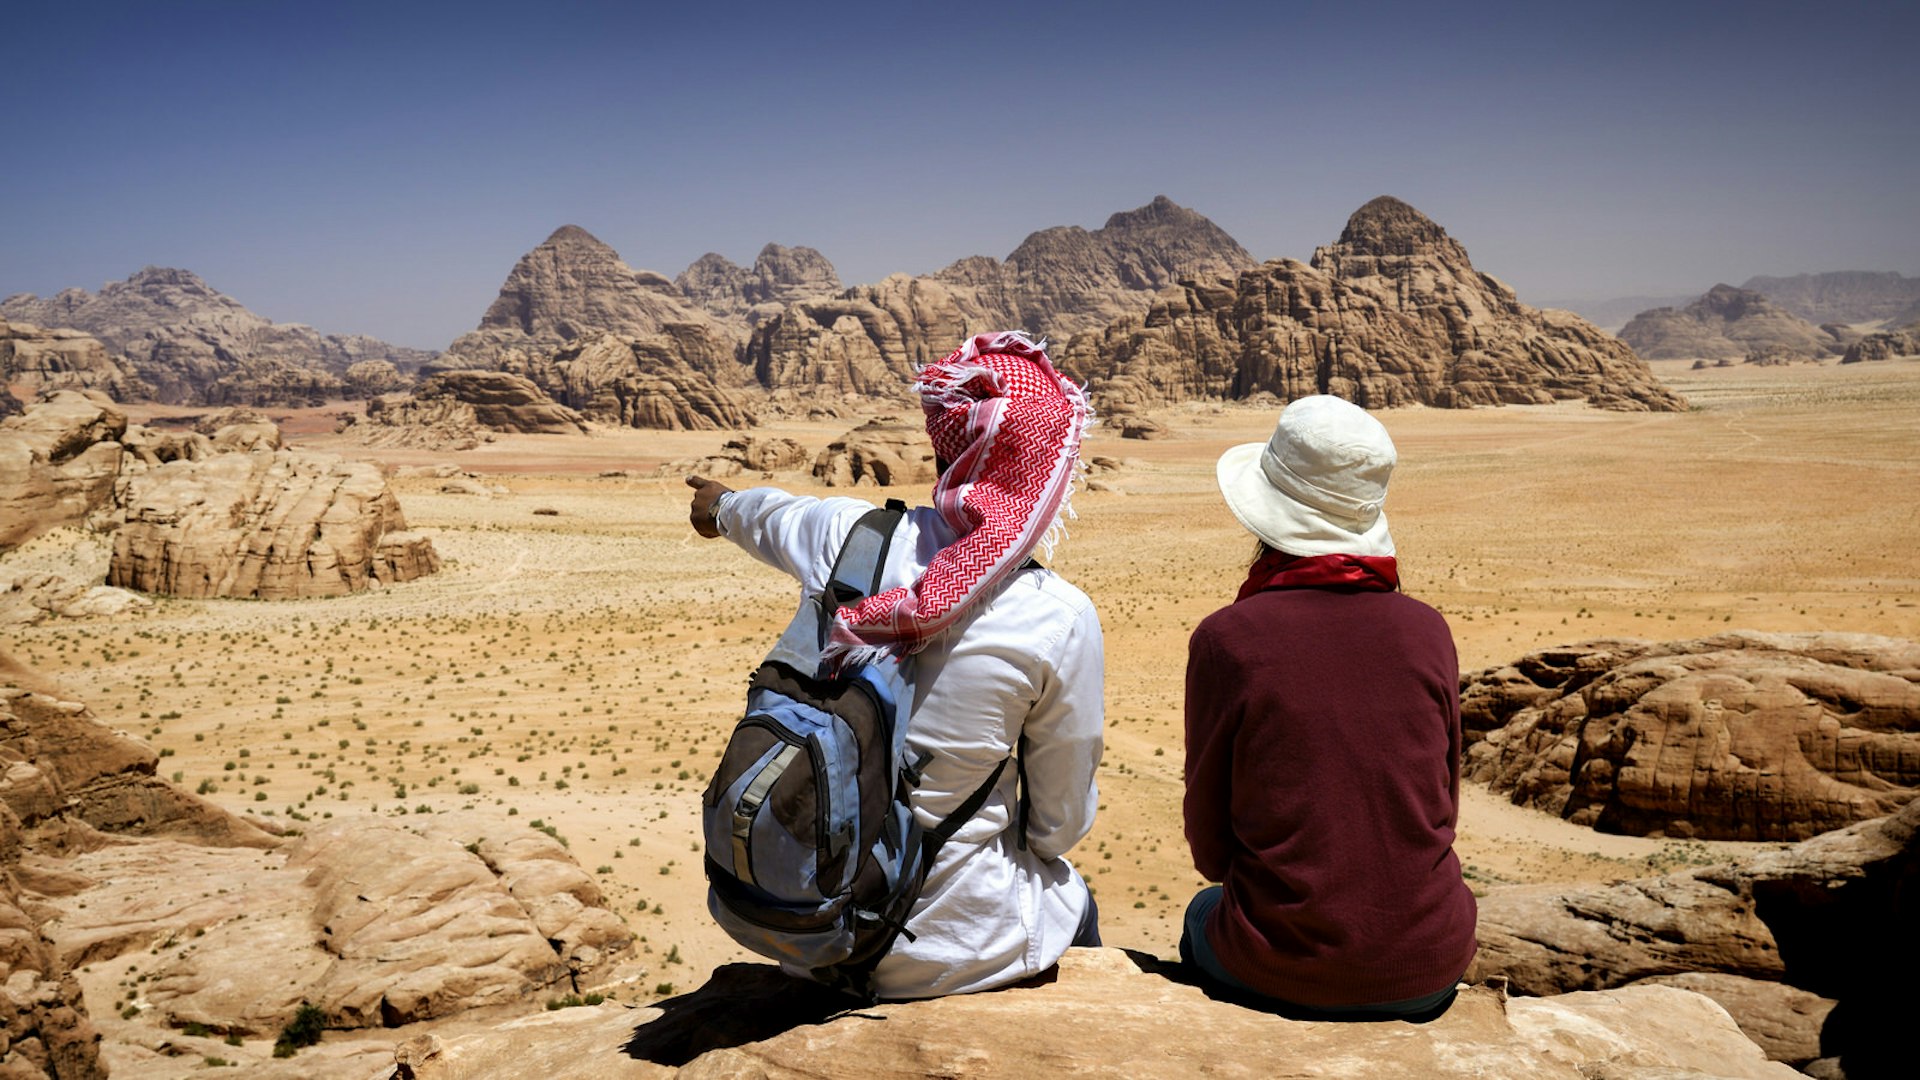 Tourist and local Bedouin guide sit on a rock in Wadi Rum, Jordan, contemplating the landscape from the mount Jebel Burdah